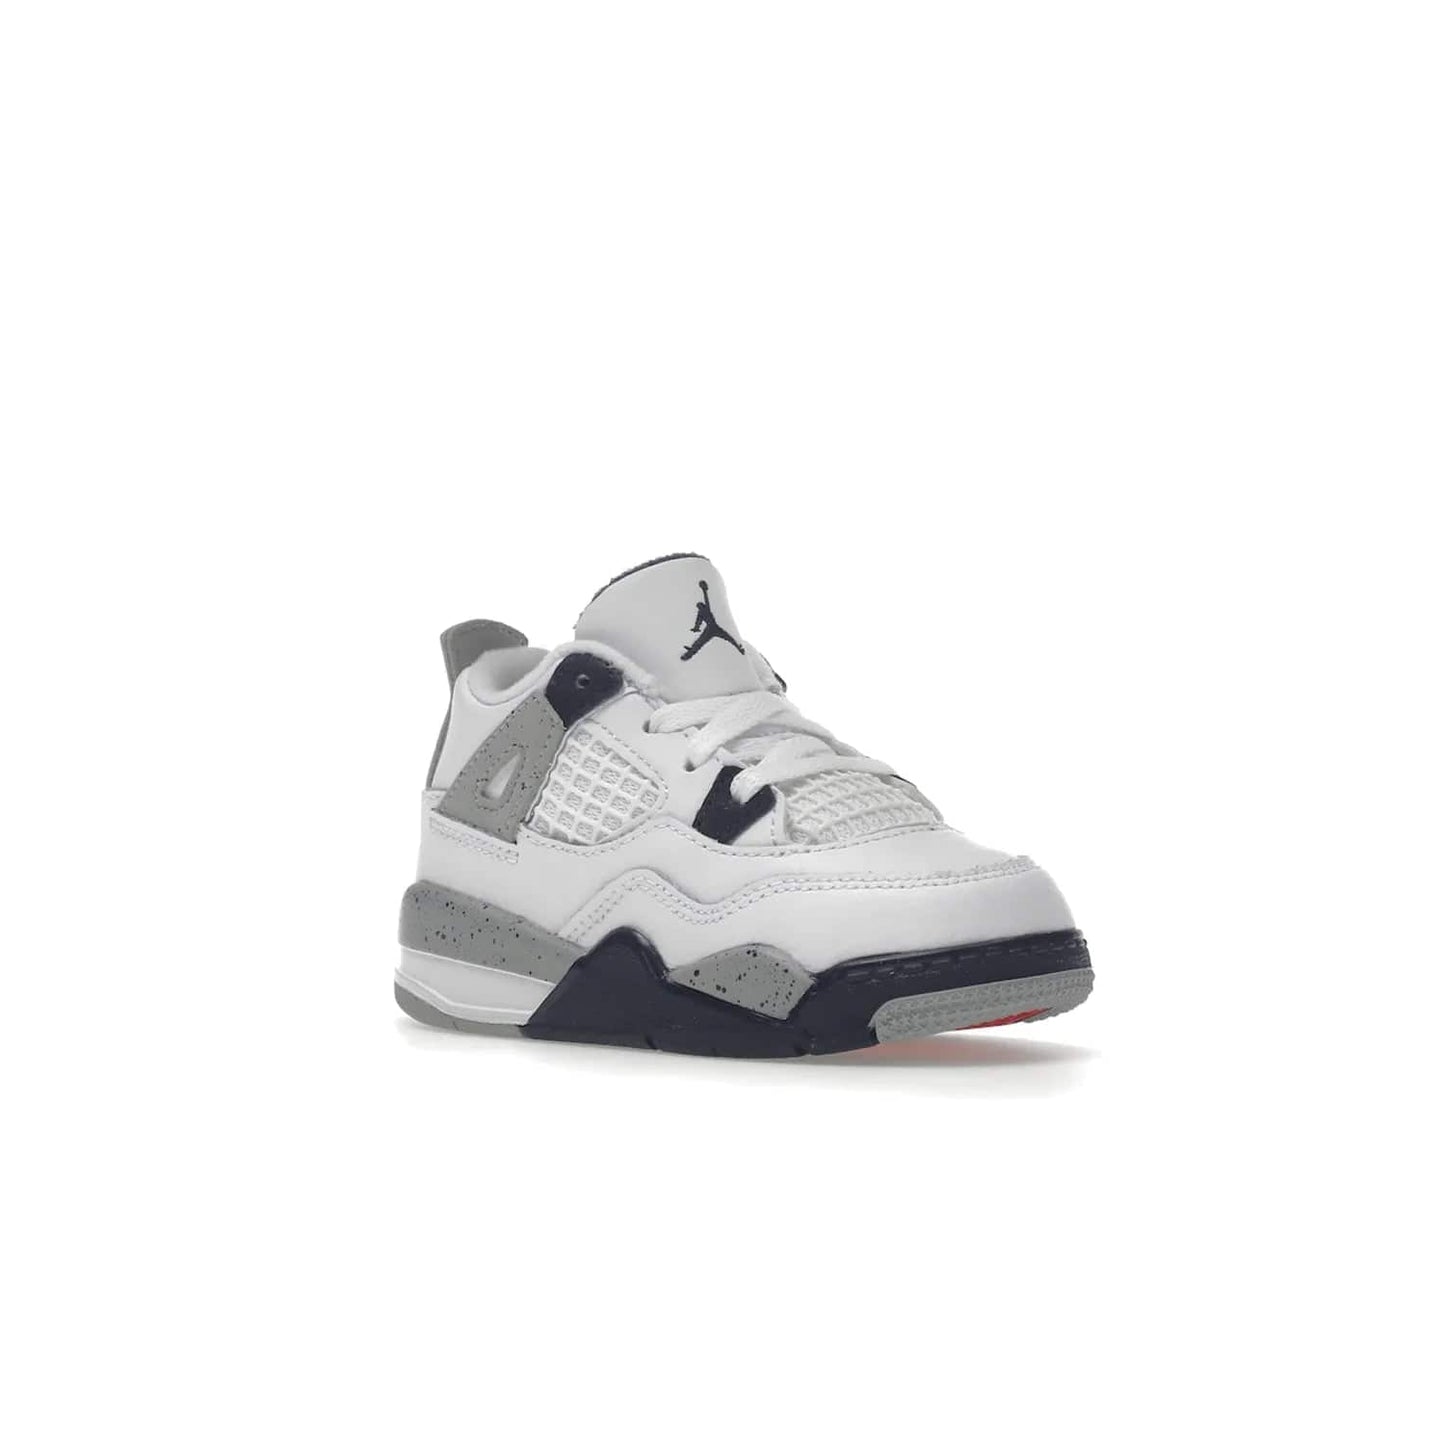 Jordan 4 Retro Midnight Navy (TD) - Image 5 - Only at www.BallersClubKickz.com - Introducing the Jordan 4 Retro Midnight Navy (TD) for kids. White leather upper with navy and grey accents plus fire red detailing. Perfect for everyday wear. Get yours before they sell out.